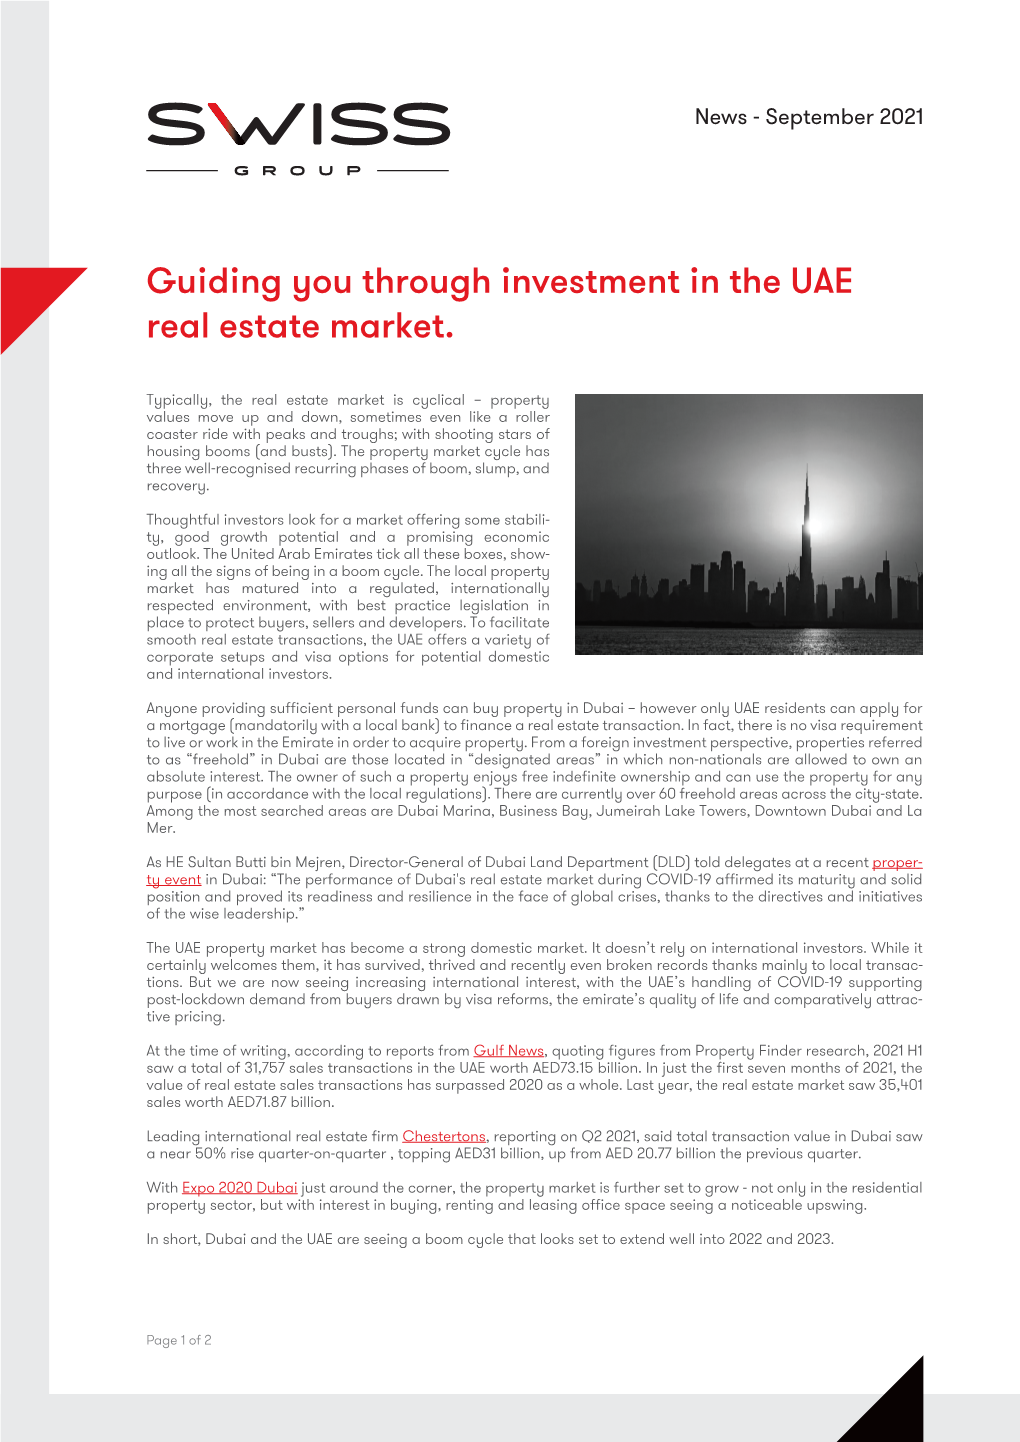 Guiding You Through Investment in the UAE Real Estate Market